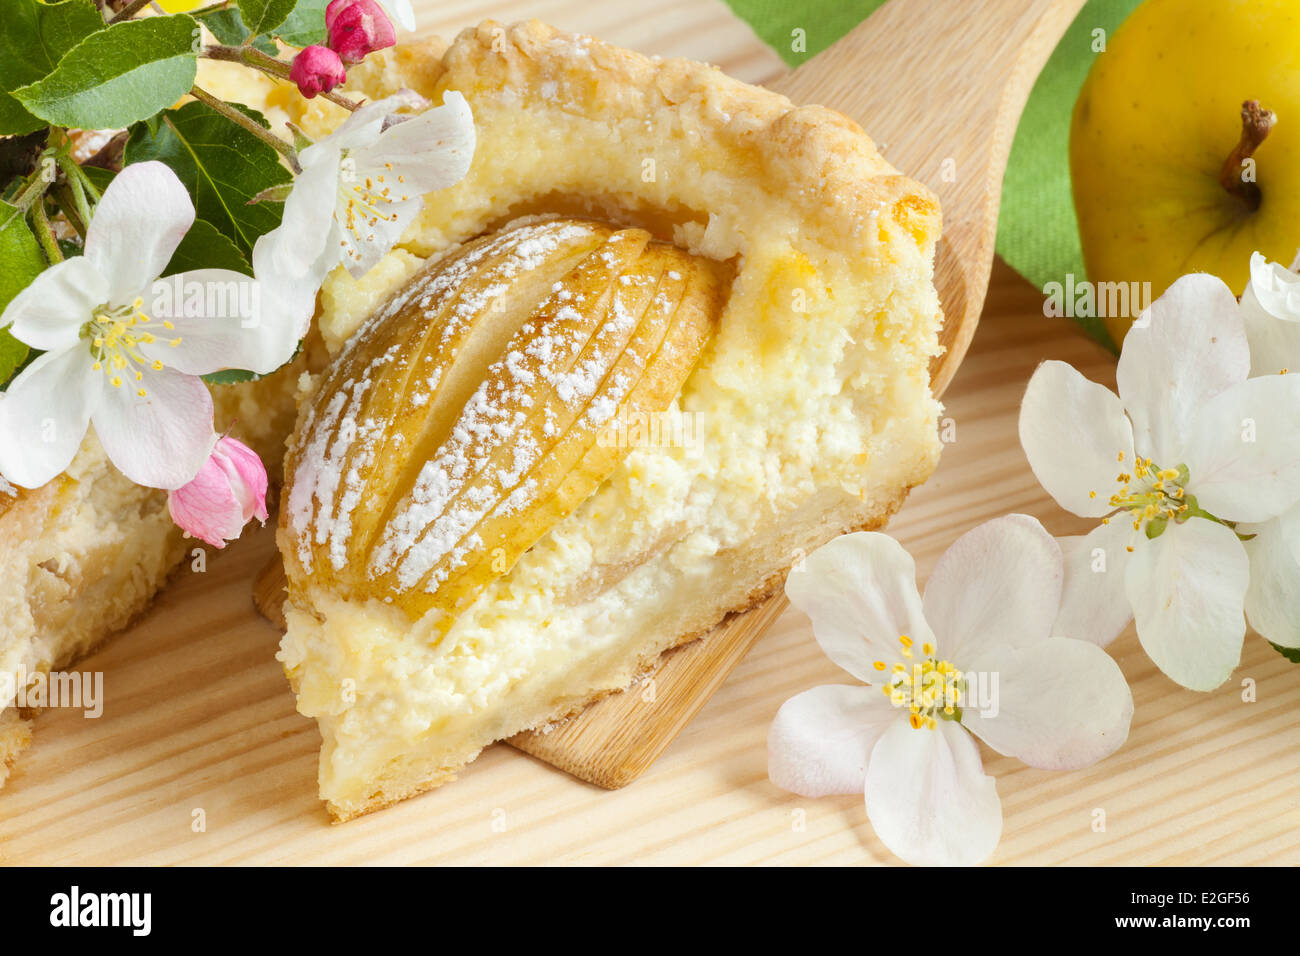 piece of homemade apple cake, apple fruit and blossom tree branch on kitchen table Stock Photo